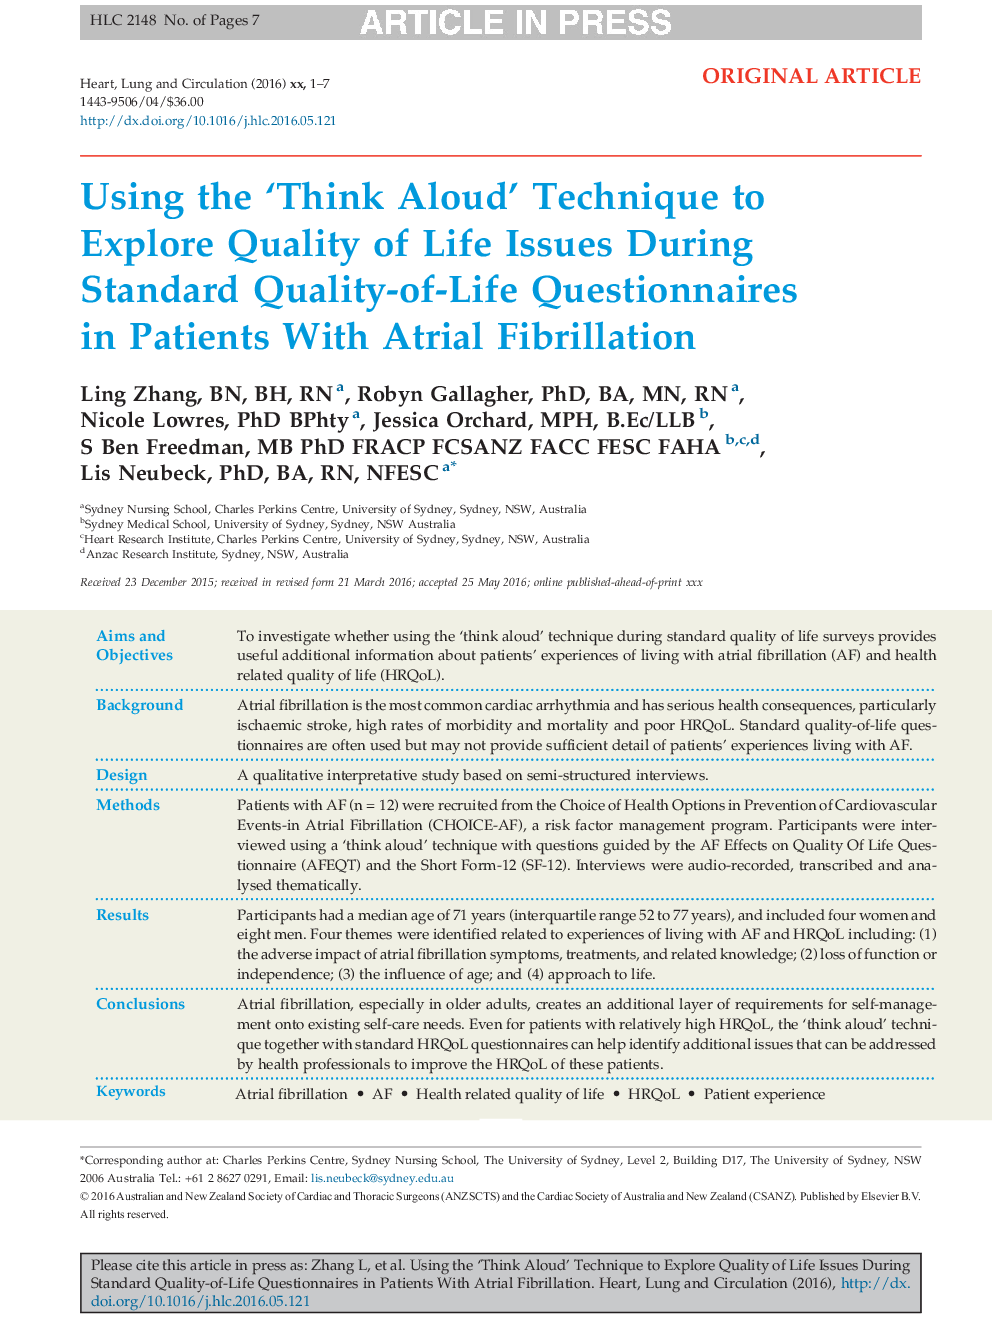 Using the 'Think Aloud' Technique to Explore Quality of Life Issues During Standard Quality-of-Life Questionnaires in Patients With Atrial Fibrillation